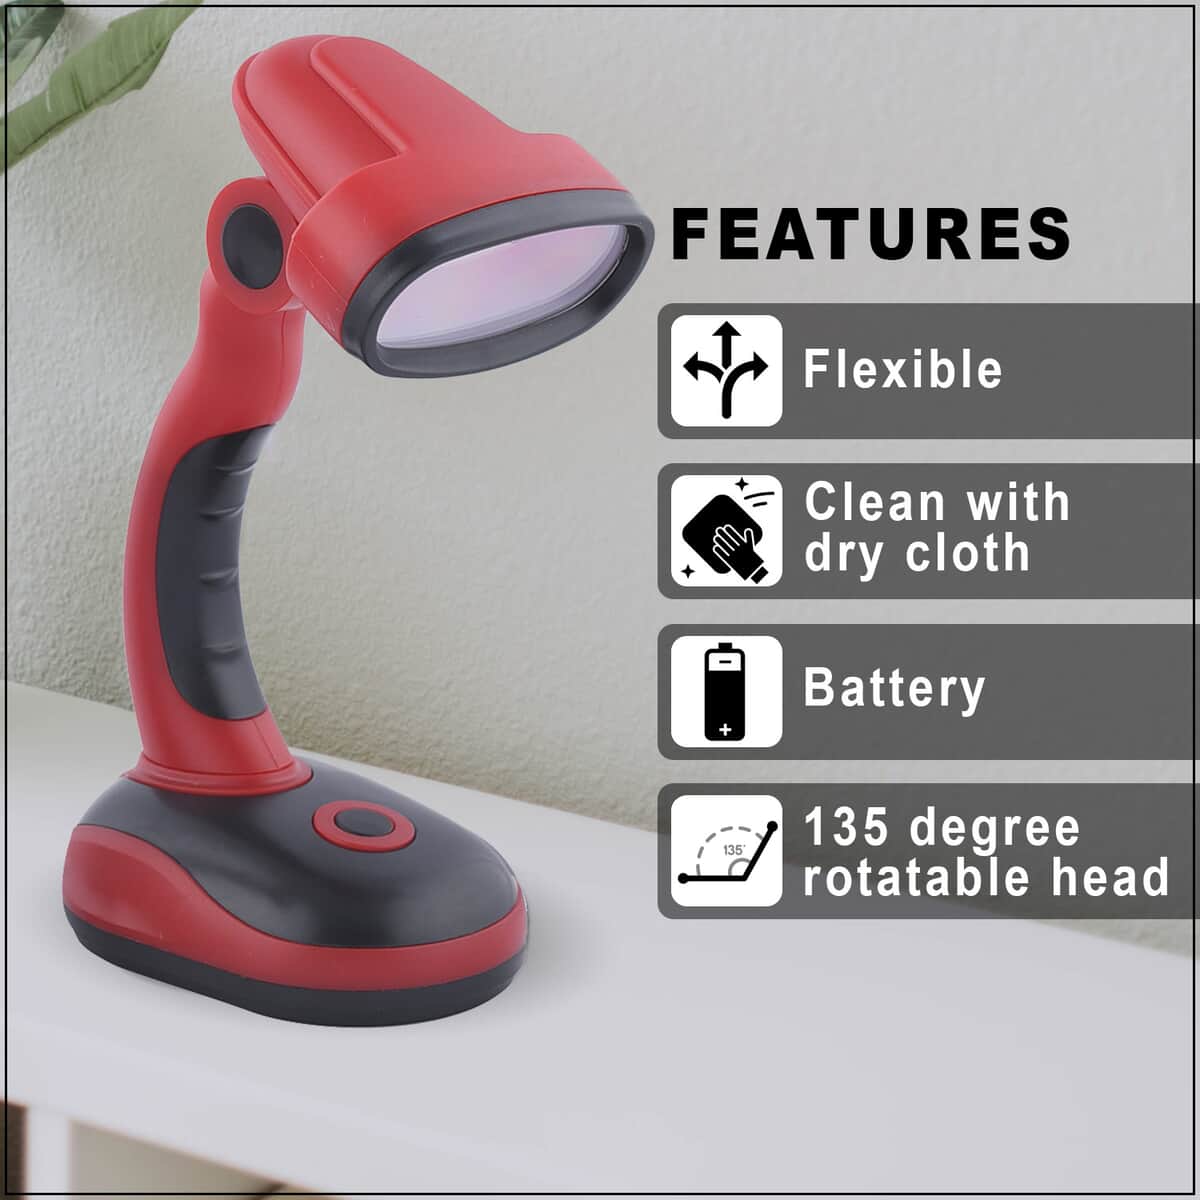 Homesmart Set of 2 Flexible Desk LED Light Lamp - Red (3xAA Batteries Not Included) image number 2